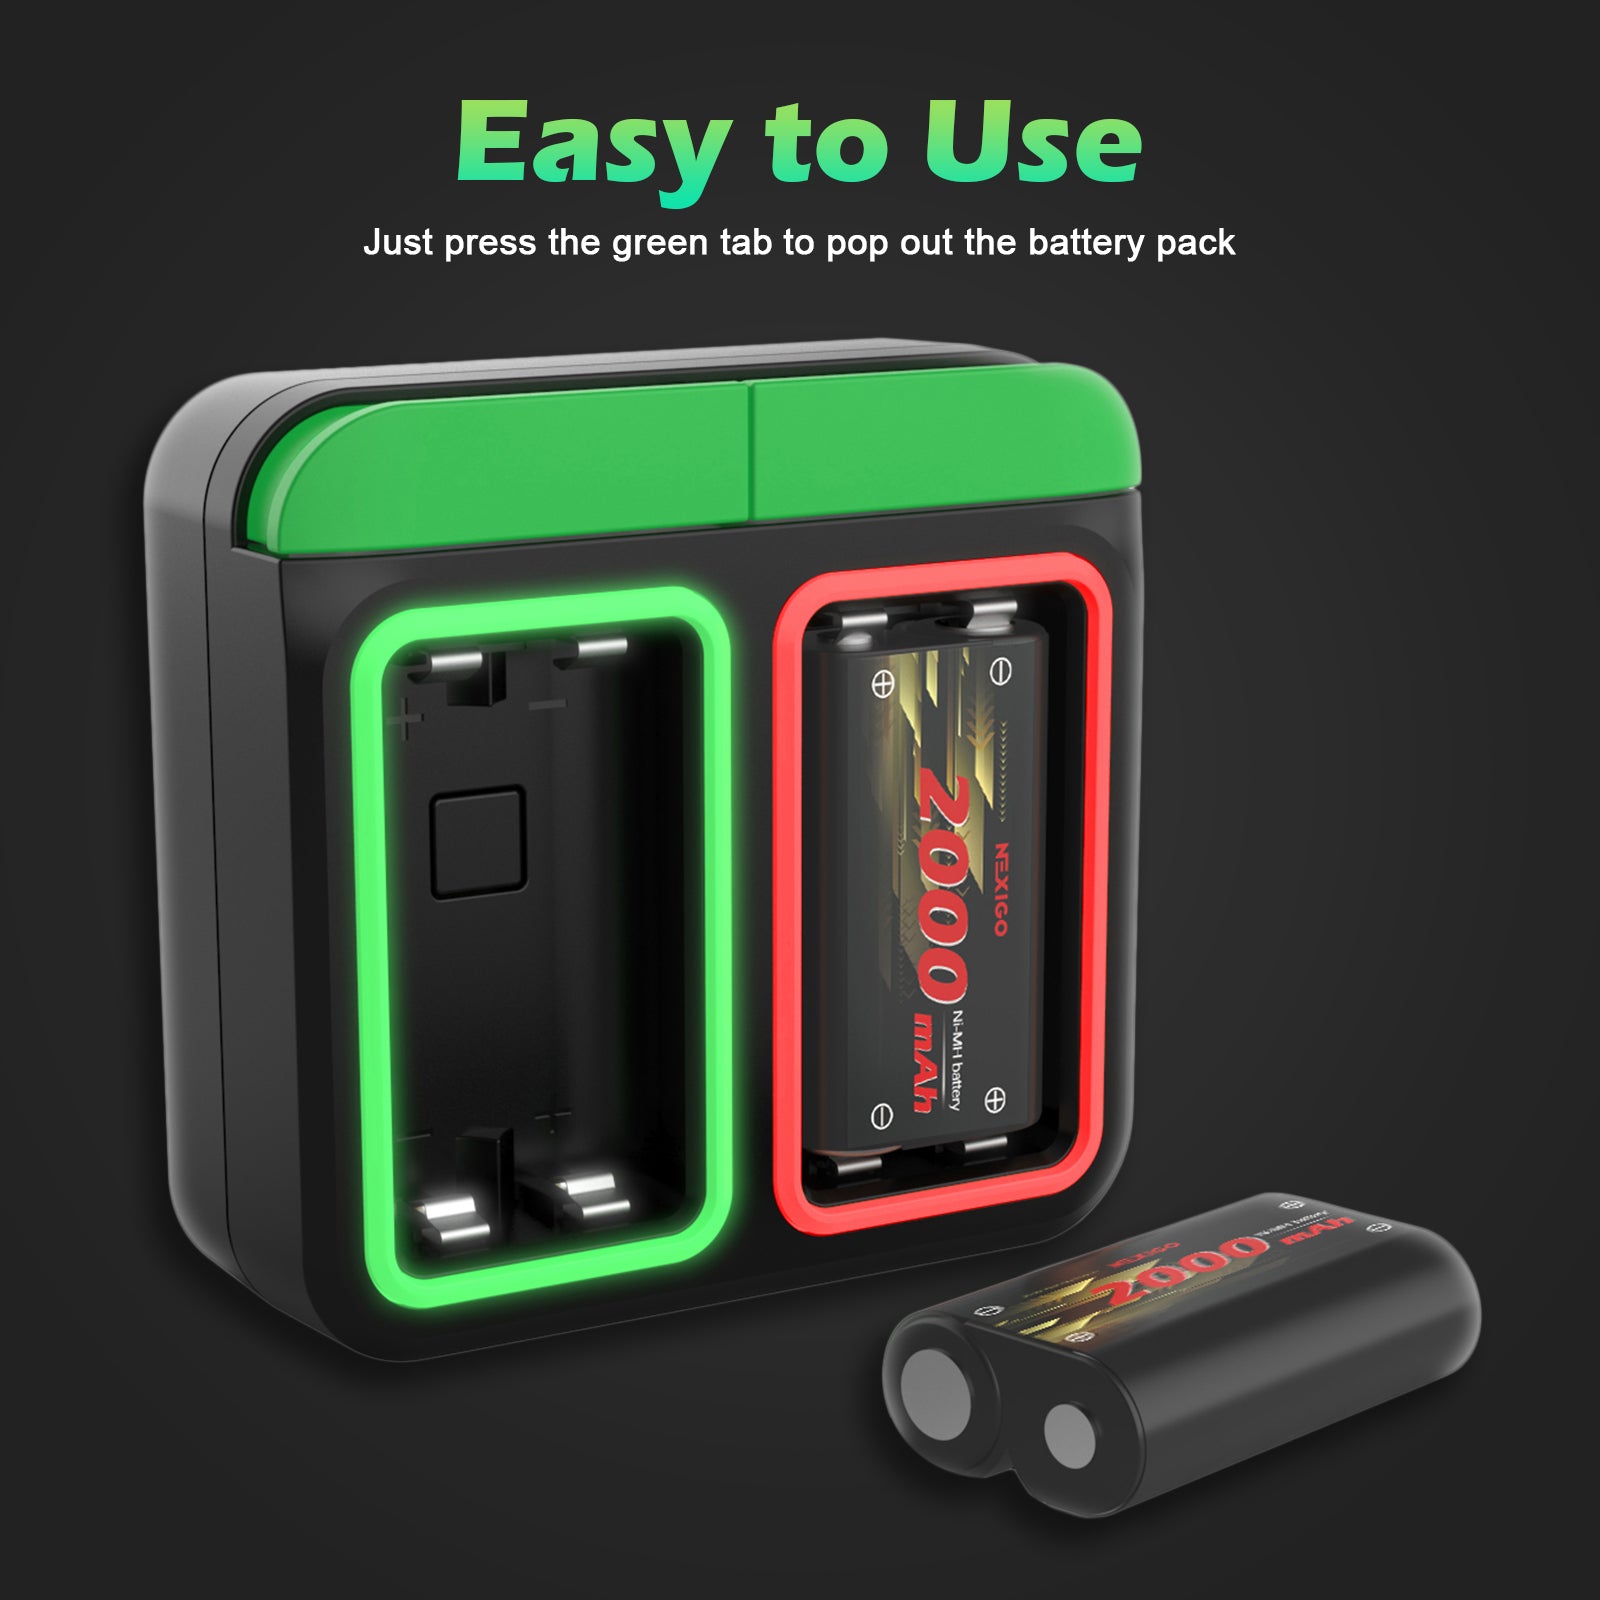 User-friendly design with two green buttons on top for easy battery pack removal.